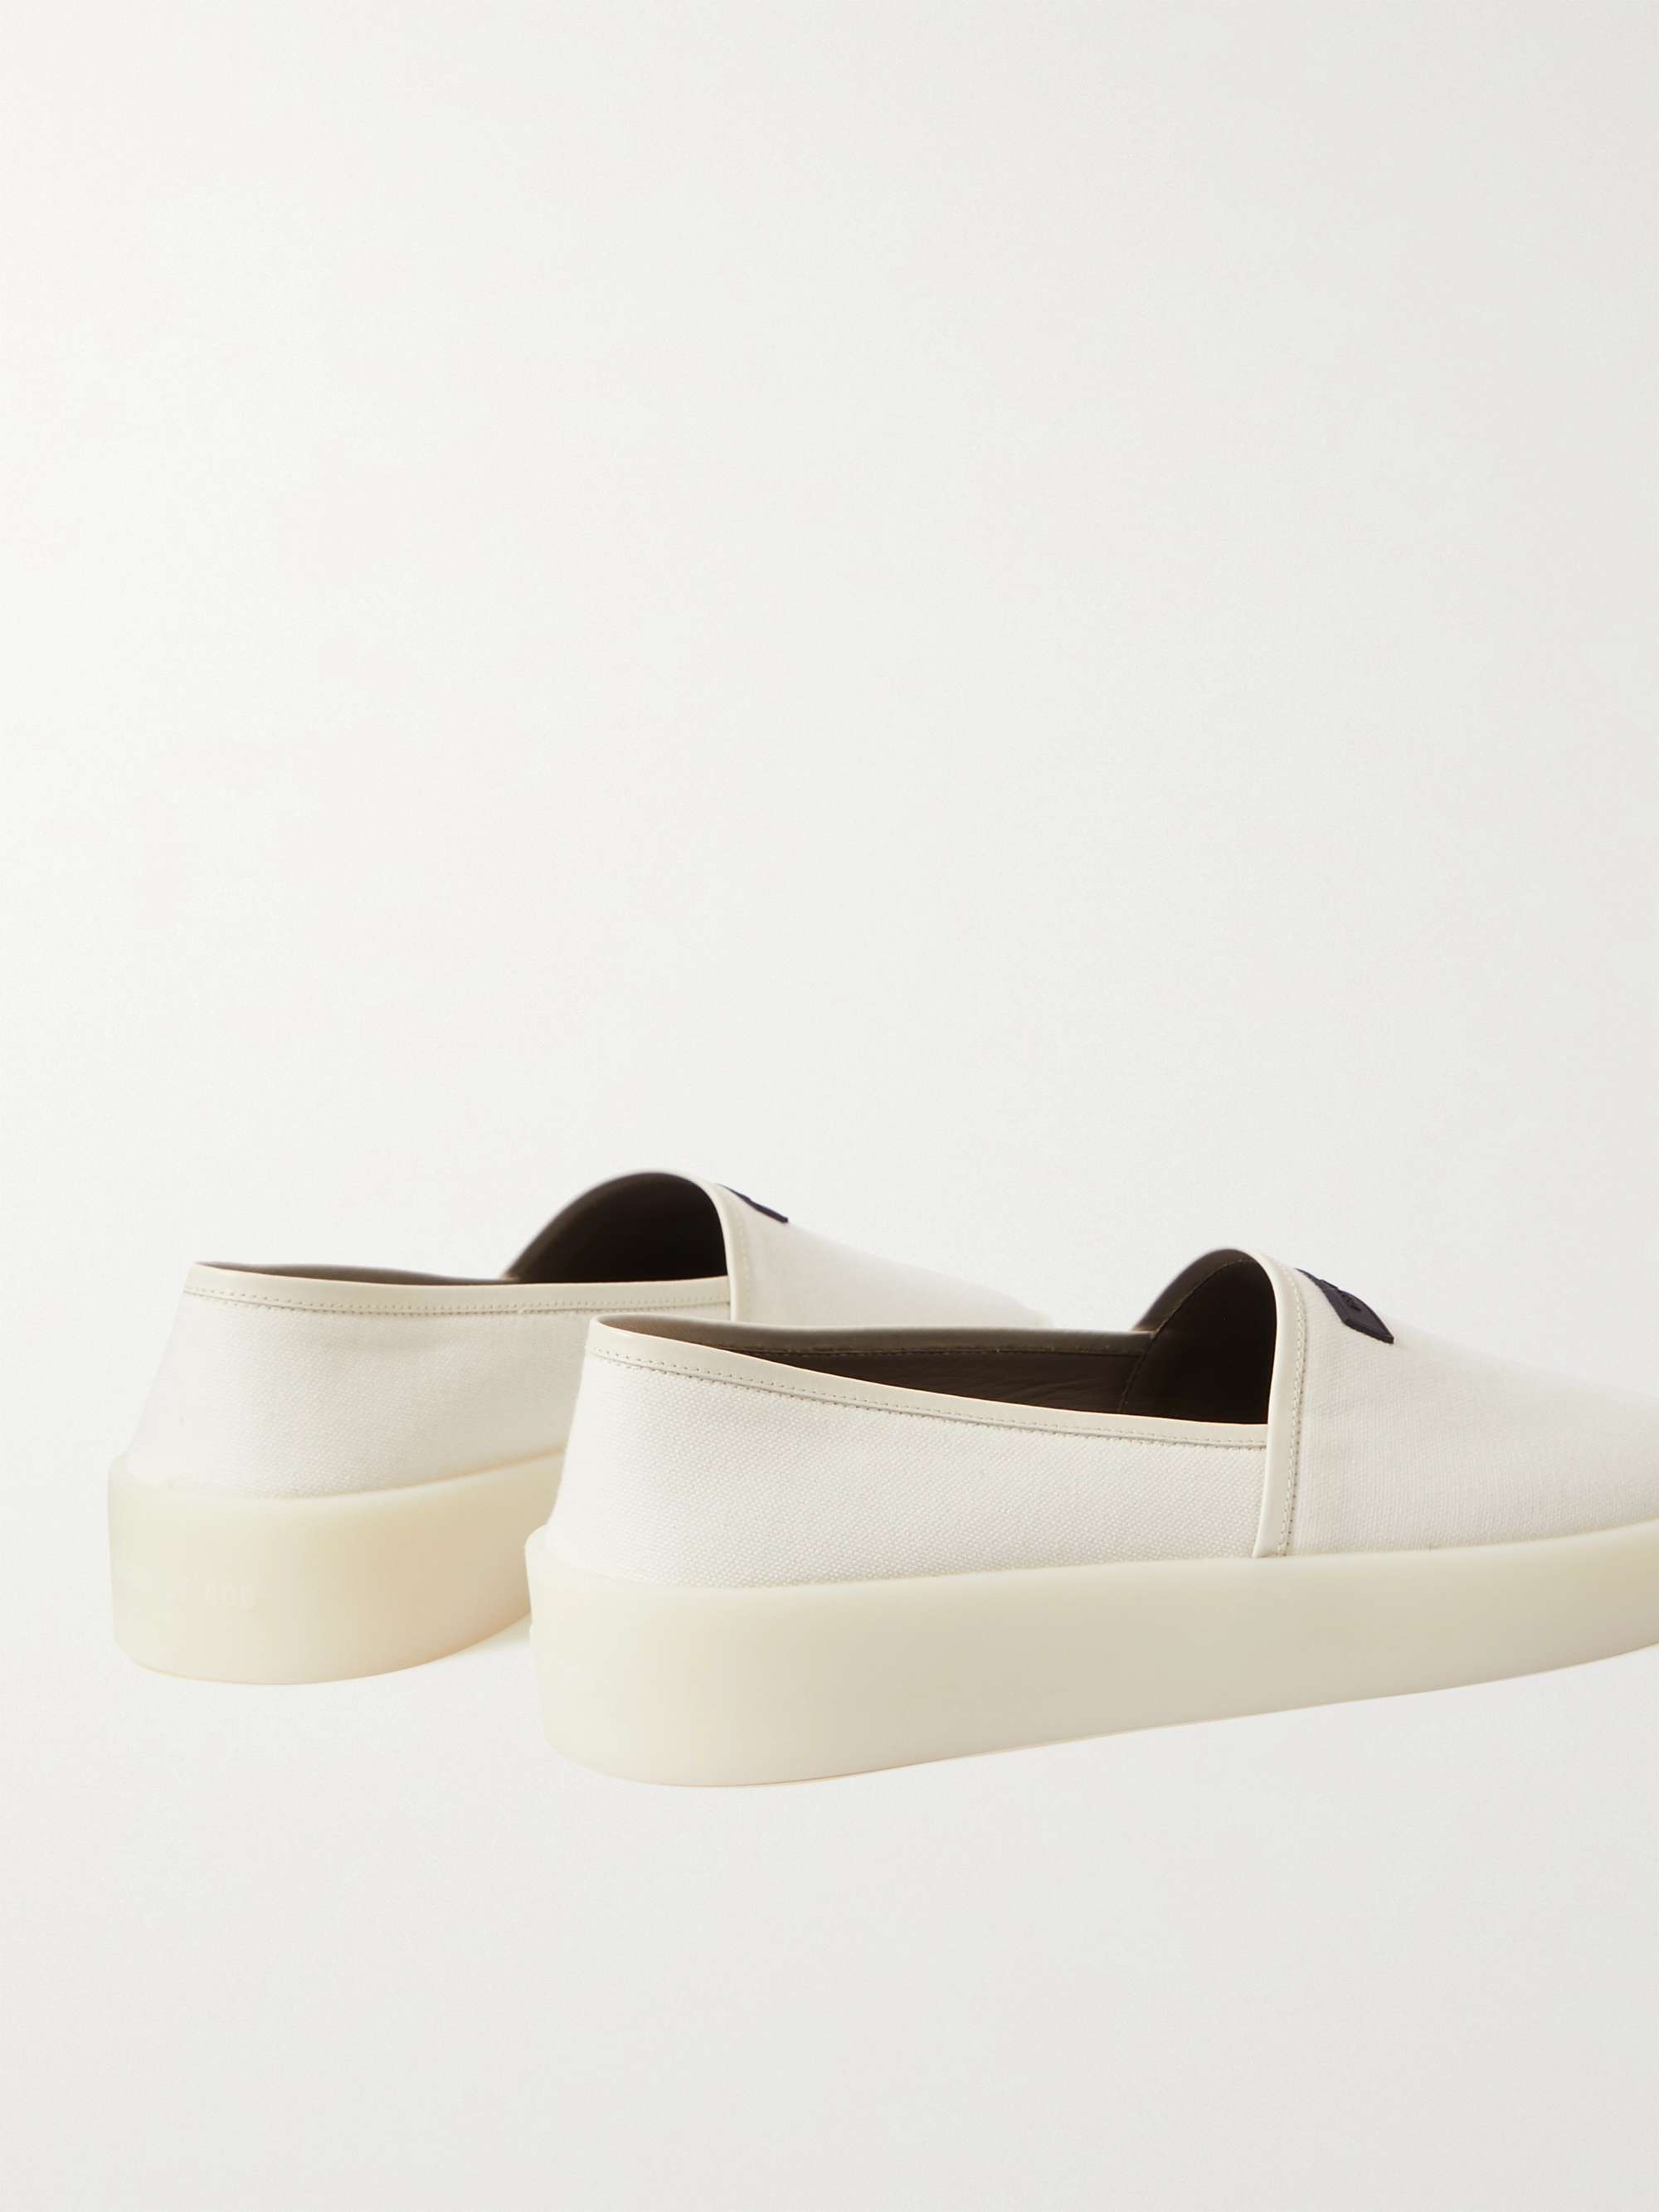 FEAR OF GOD Leather-Trimmed Canvas Espadrilles